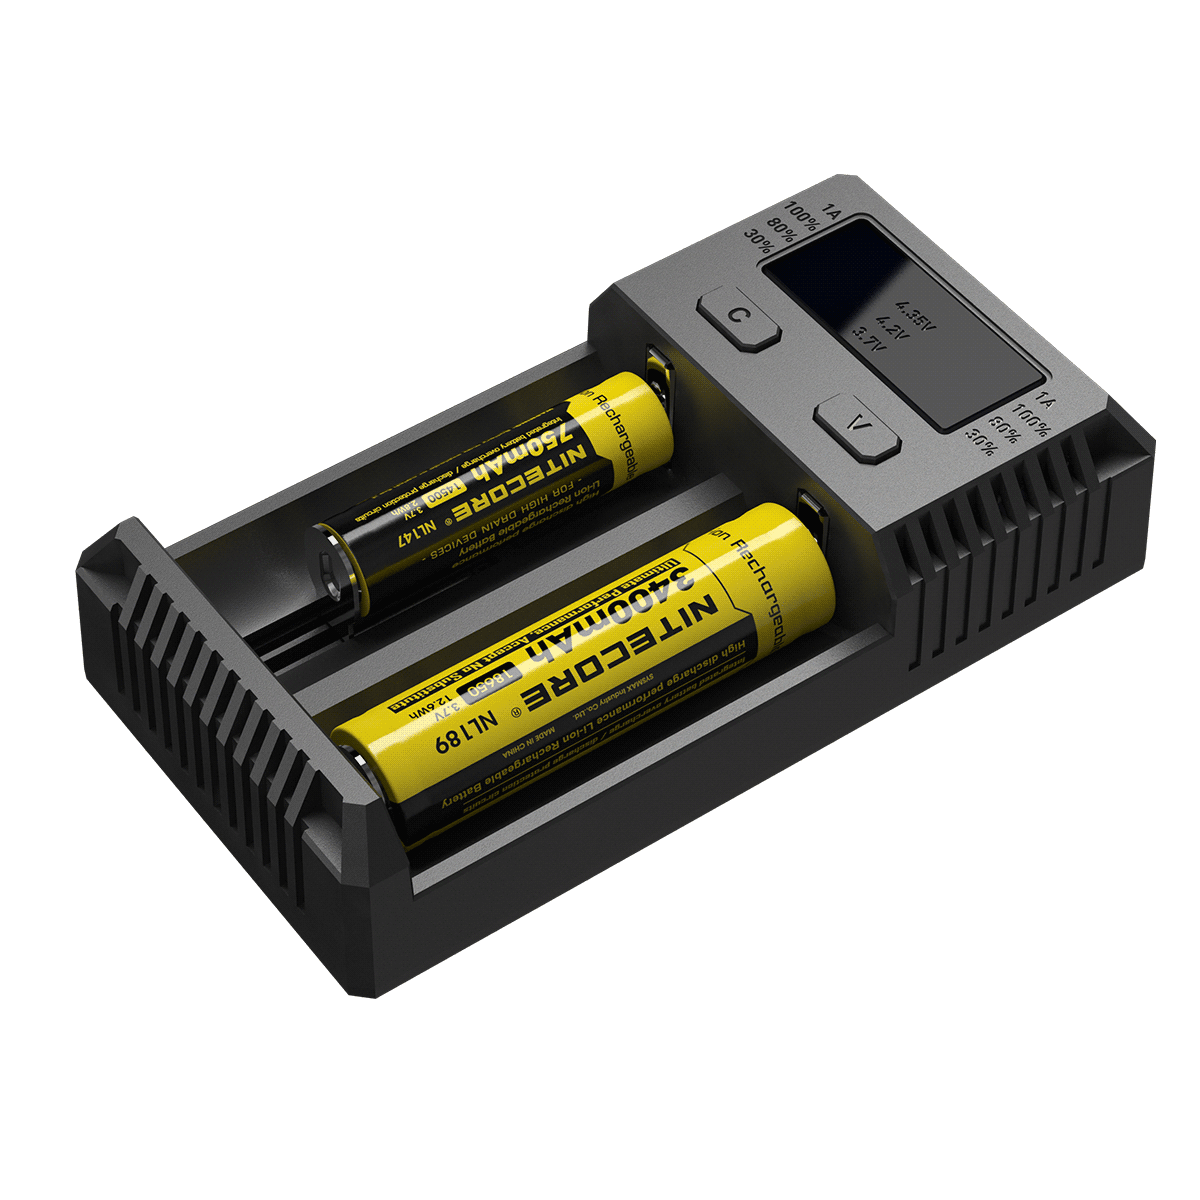 Battery Chargers by Nitecore